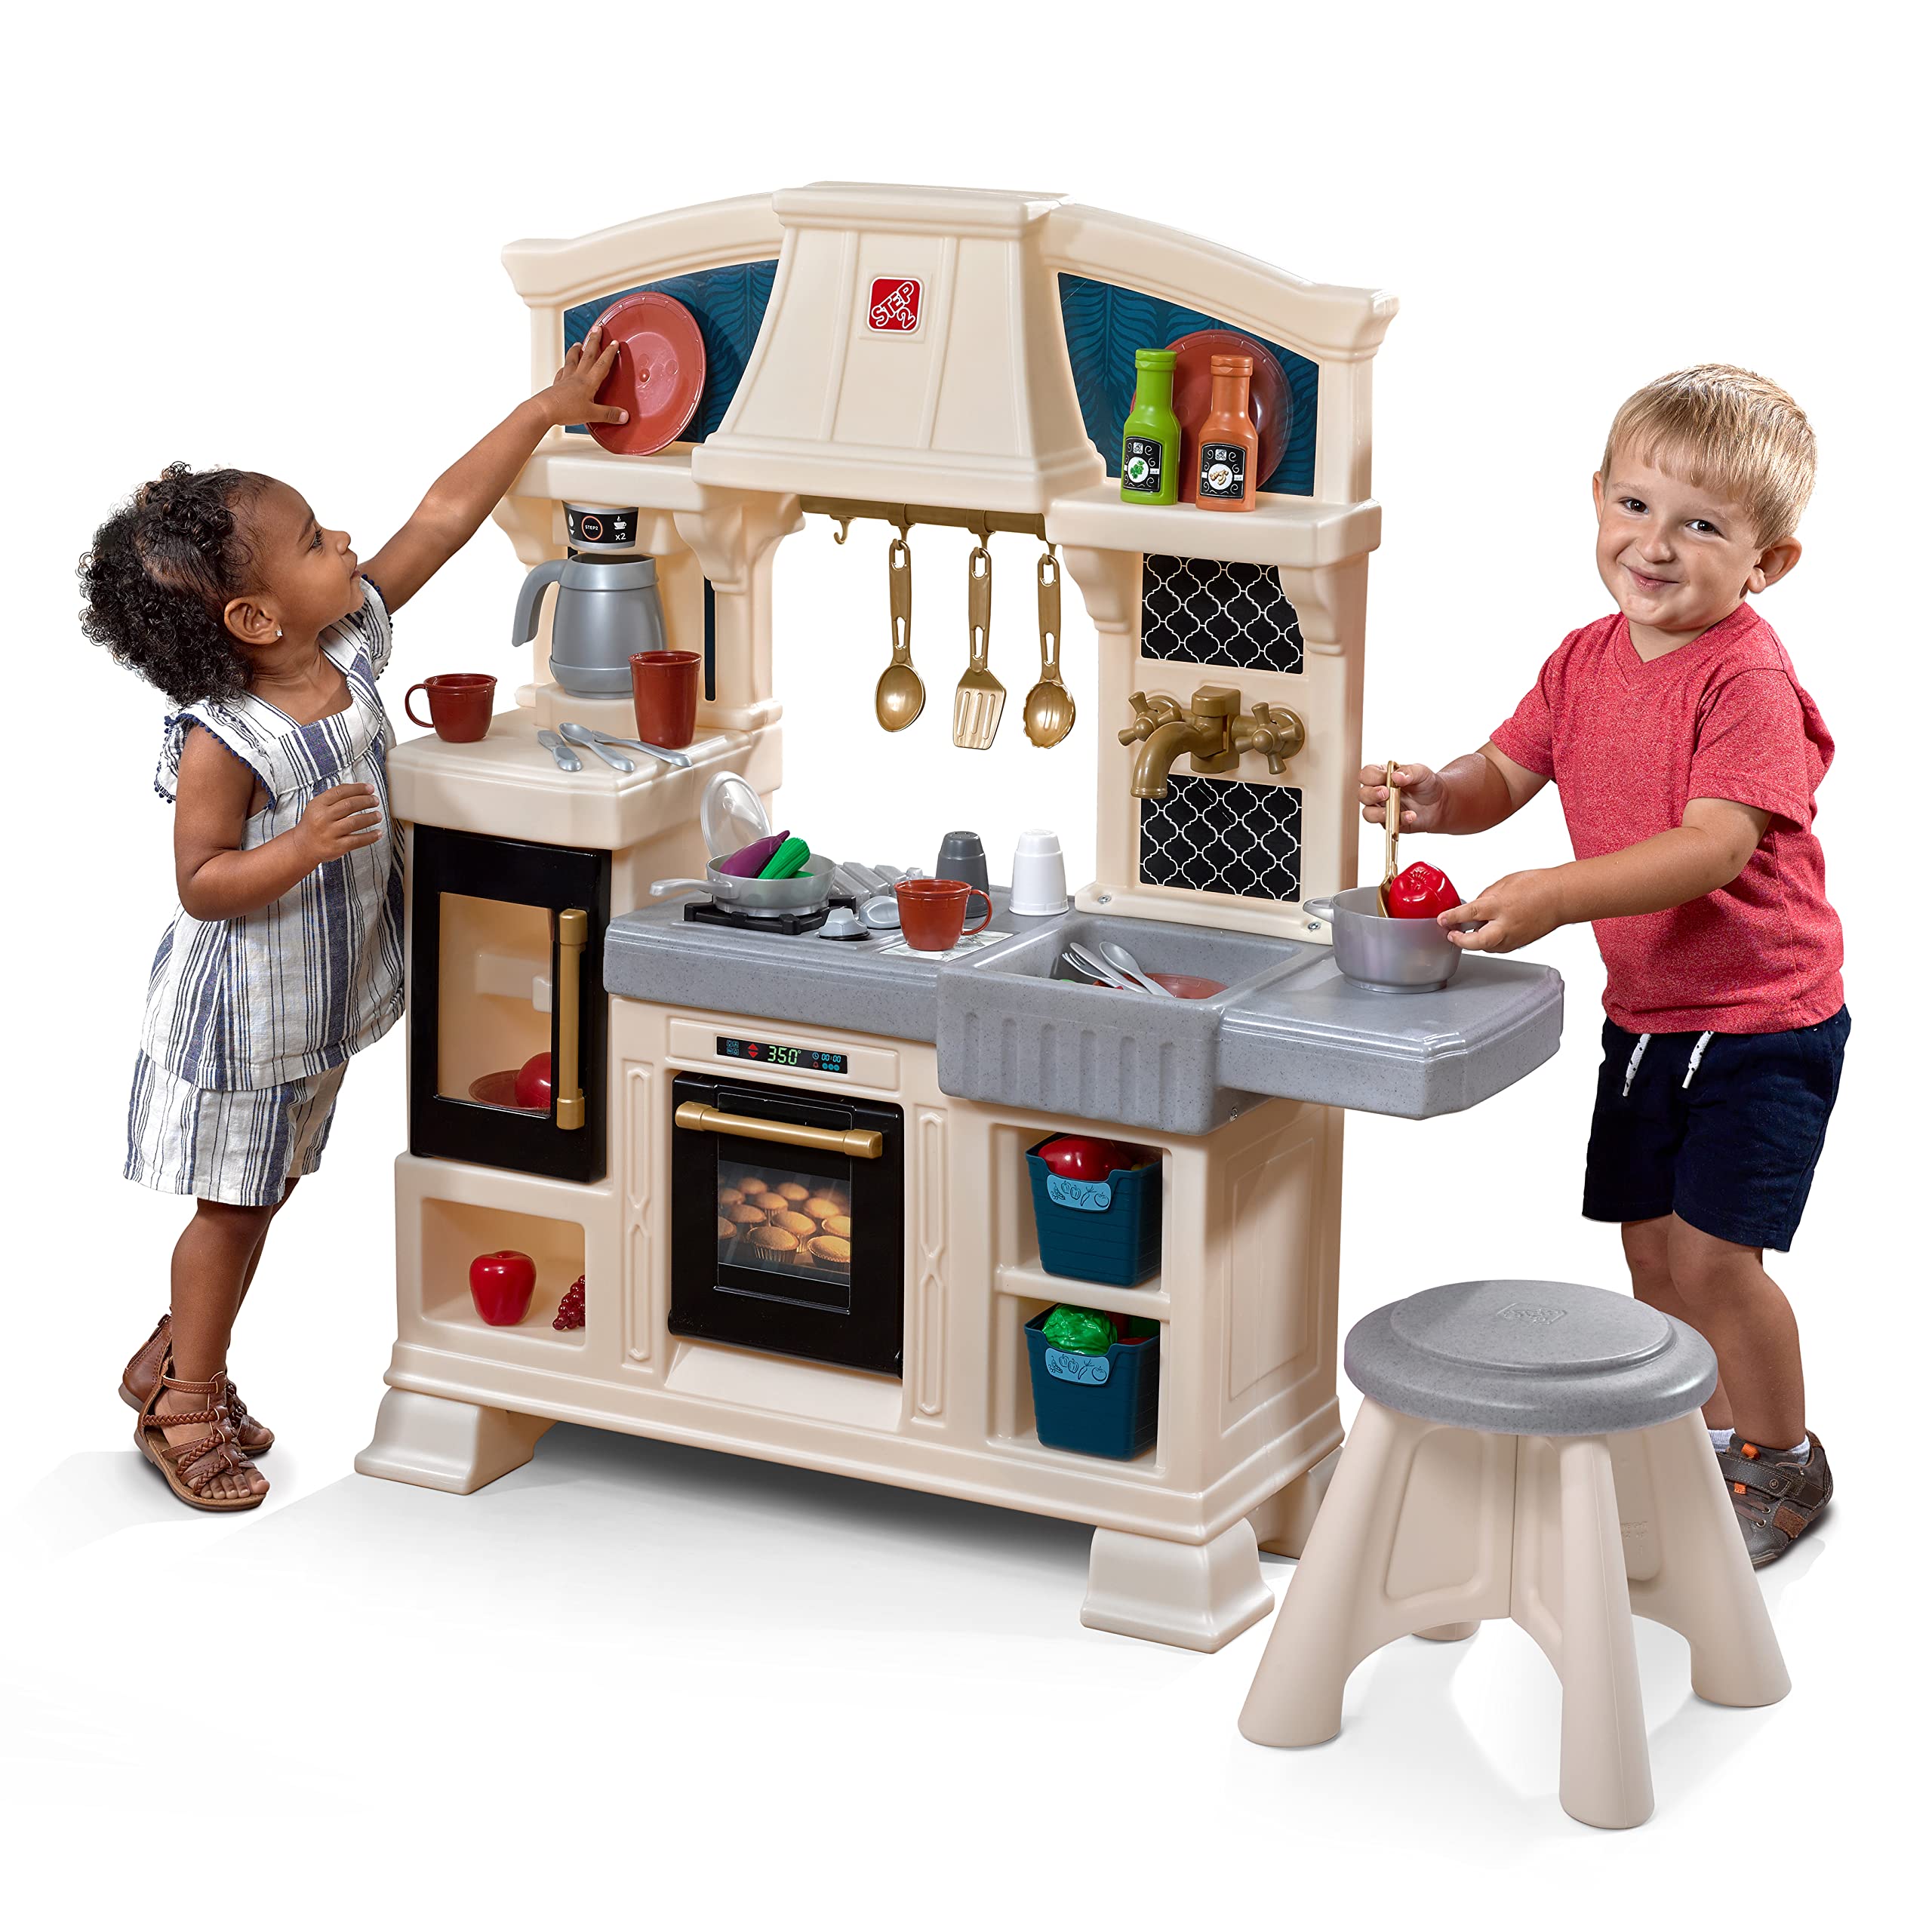 Step2 Classic Chic Play Kitchen | Toddler Kitchen Playset with Accessories & Stool (Amazon Exclusive)